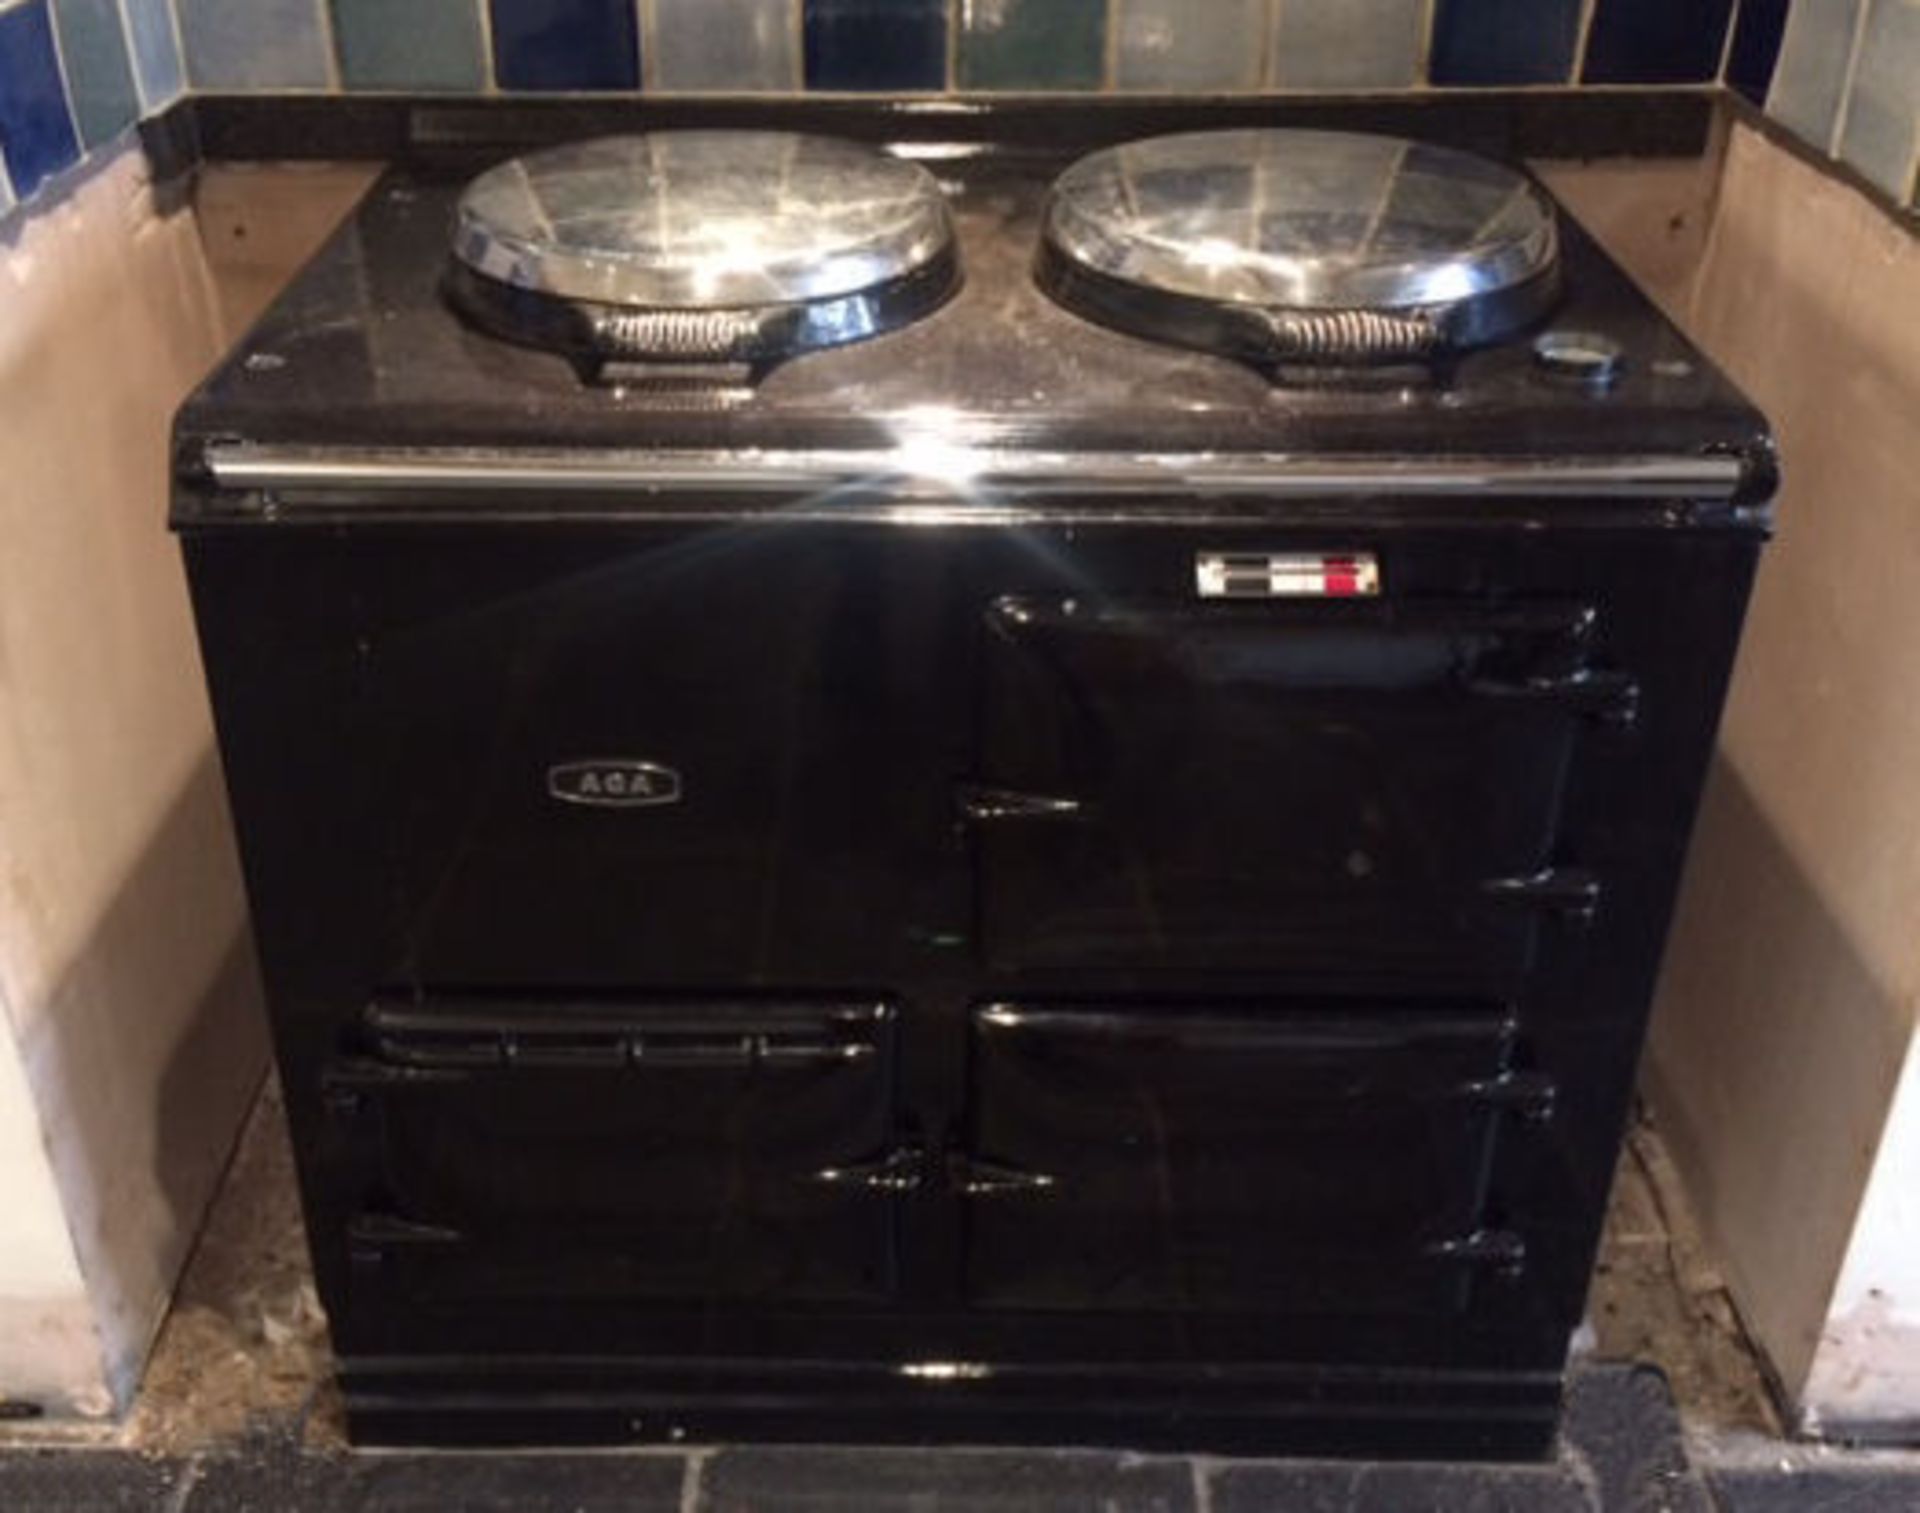 1 x Aga 2-Oven Gas Range Cooker - Cast Iron With Black Enamel Finish - Preowned - NO VAT